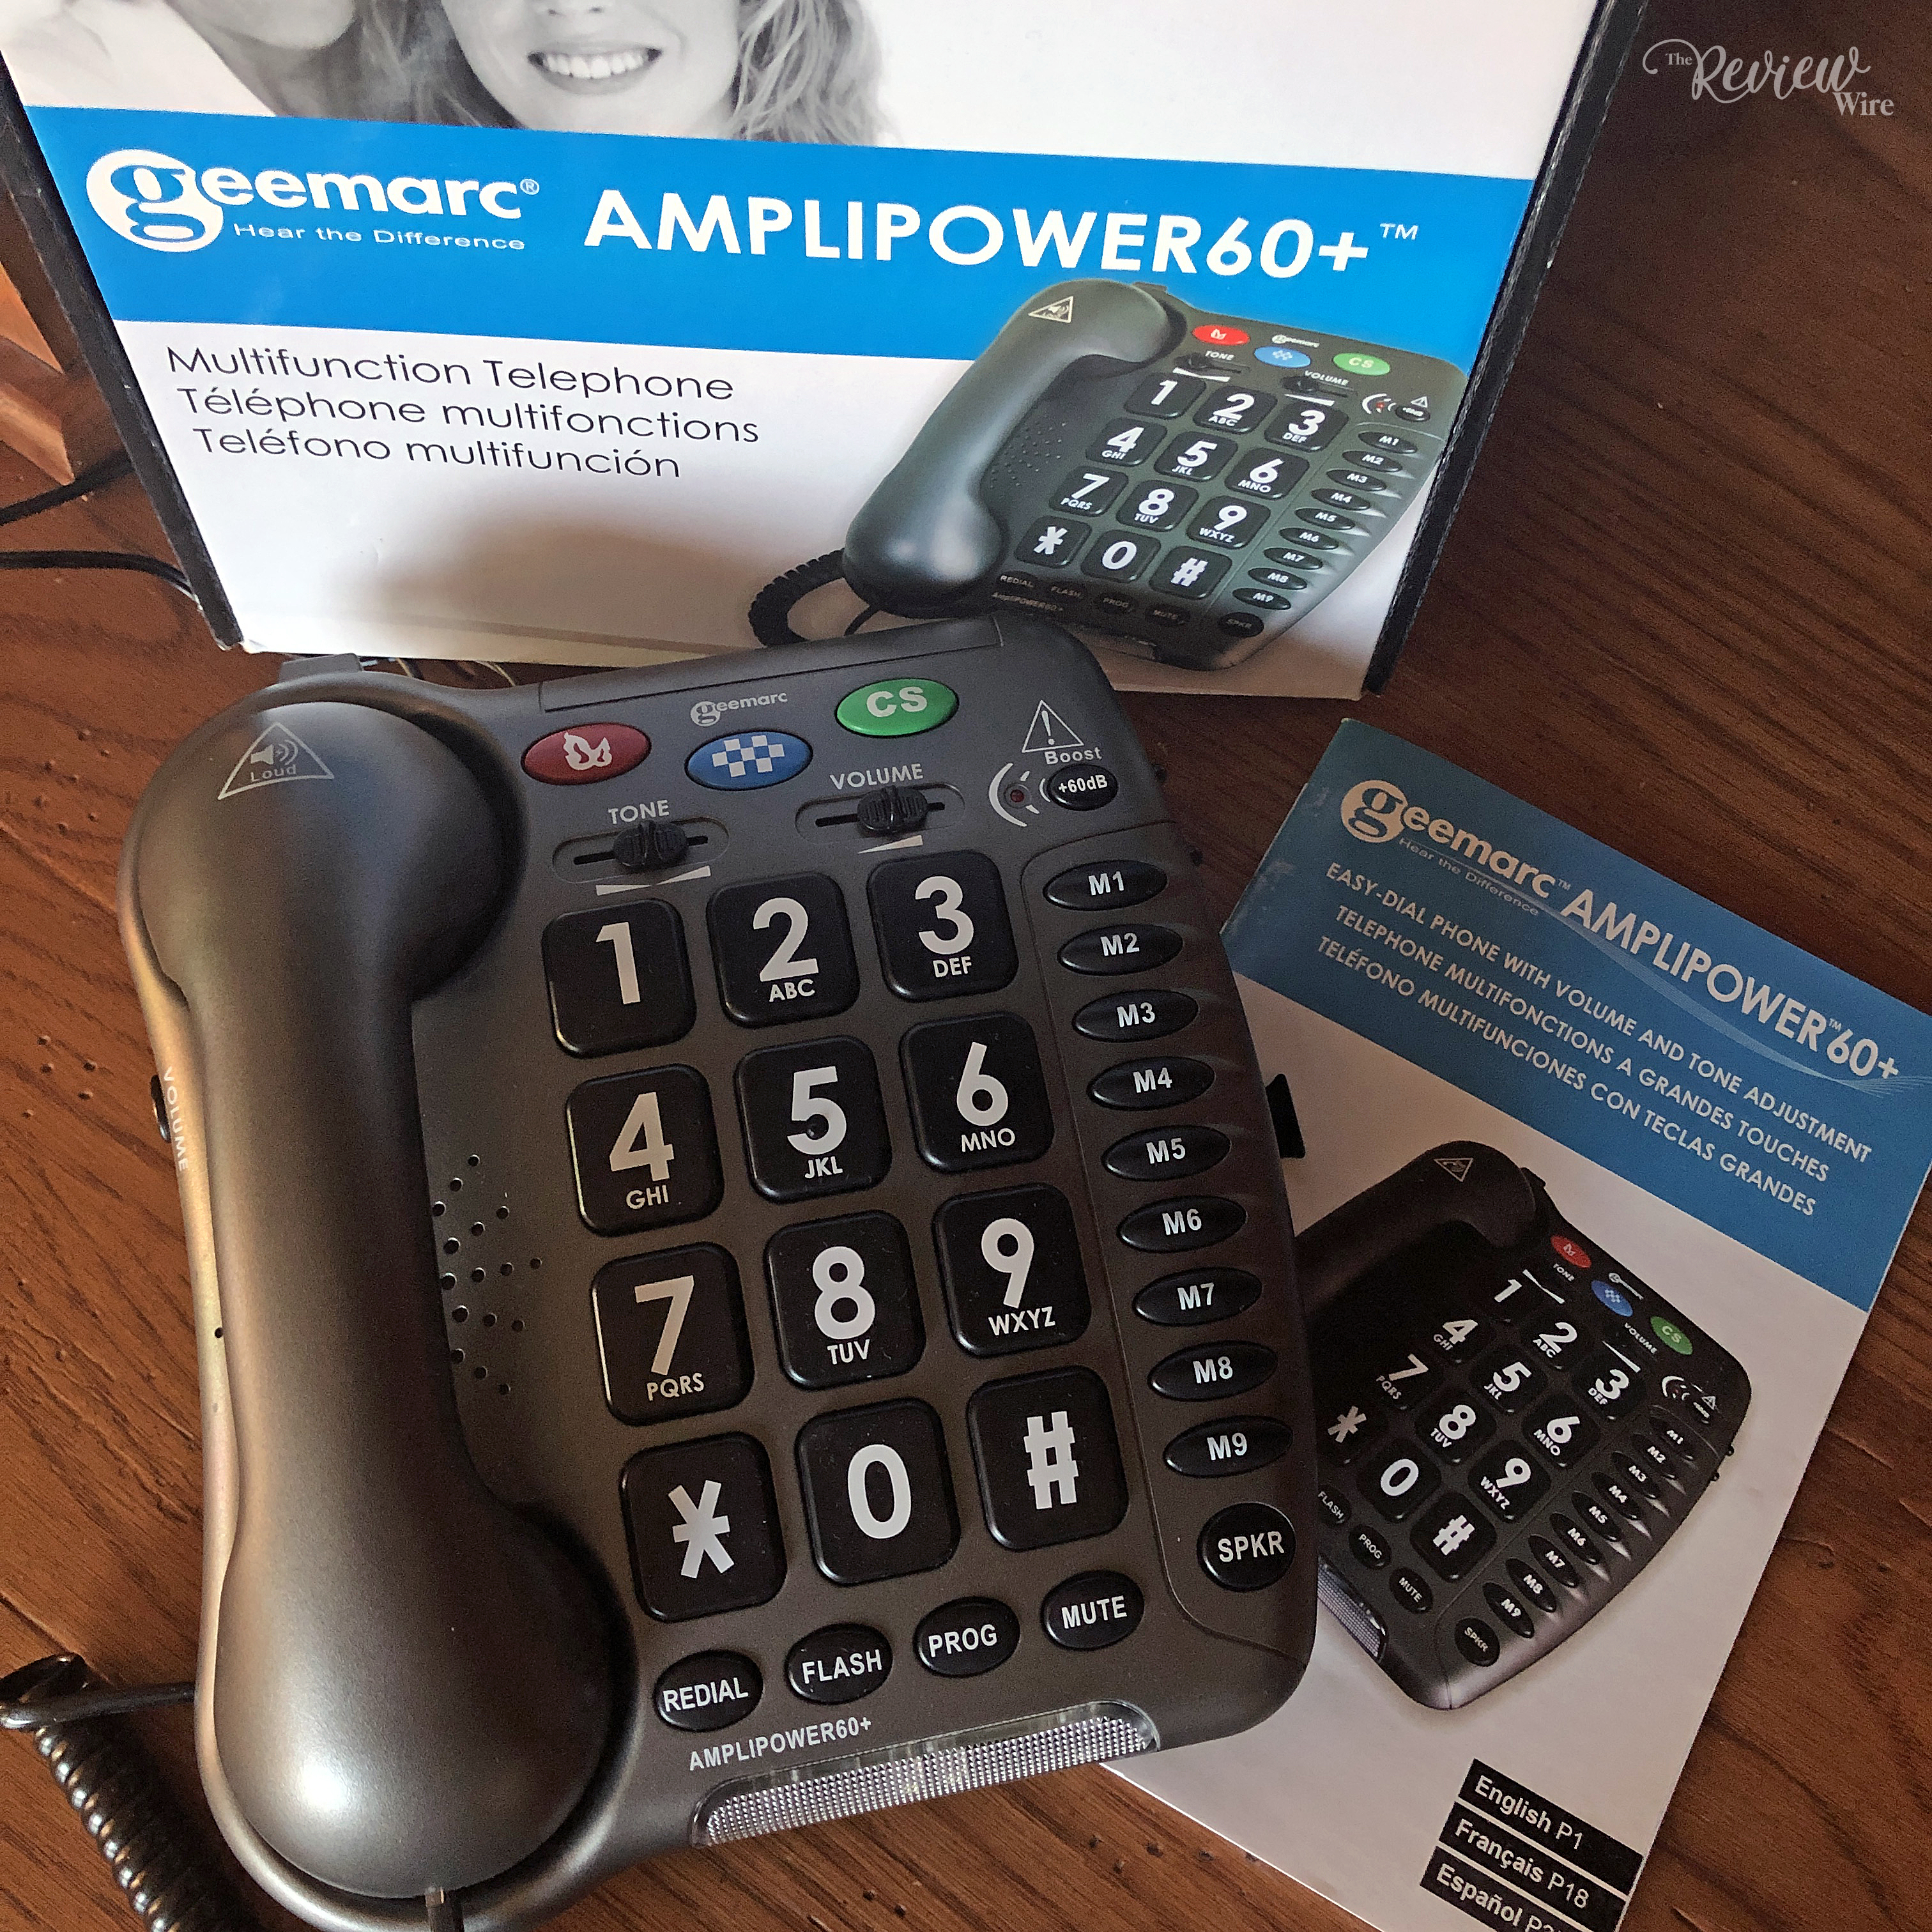 The Review Wire: AmpilPower 60+ Phone Review